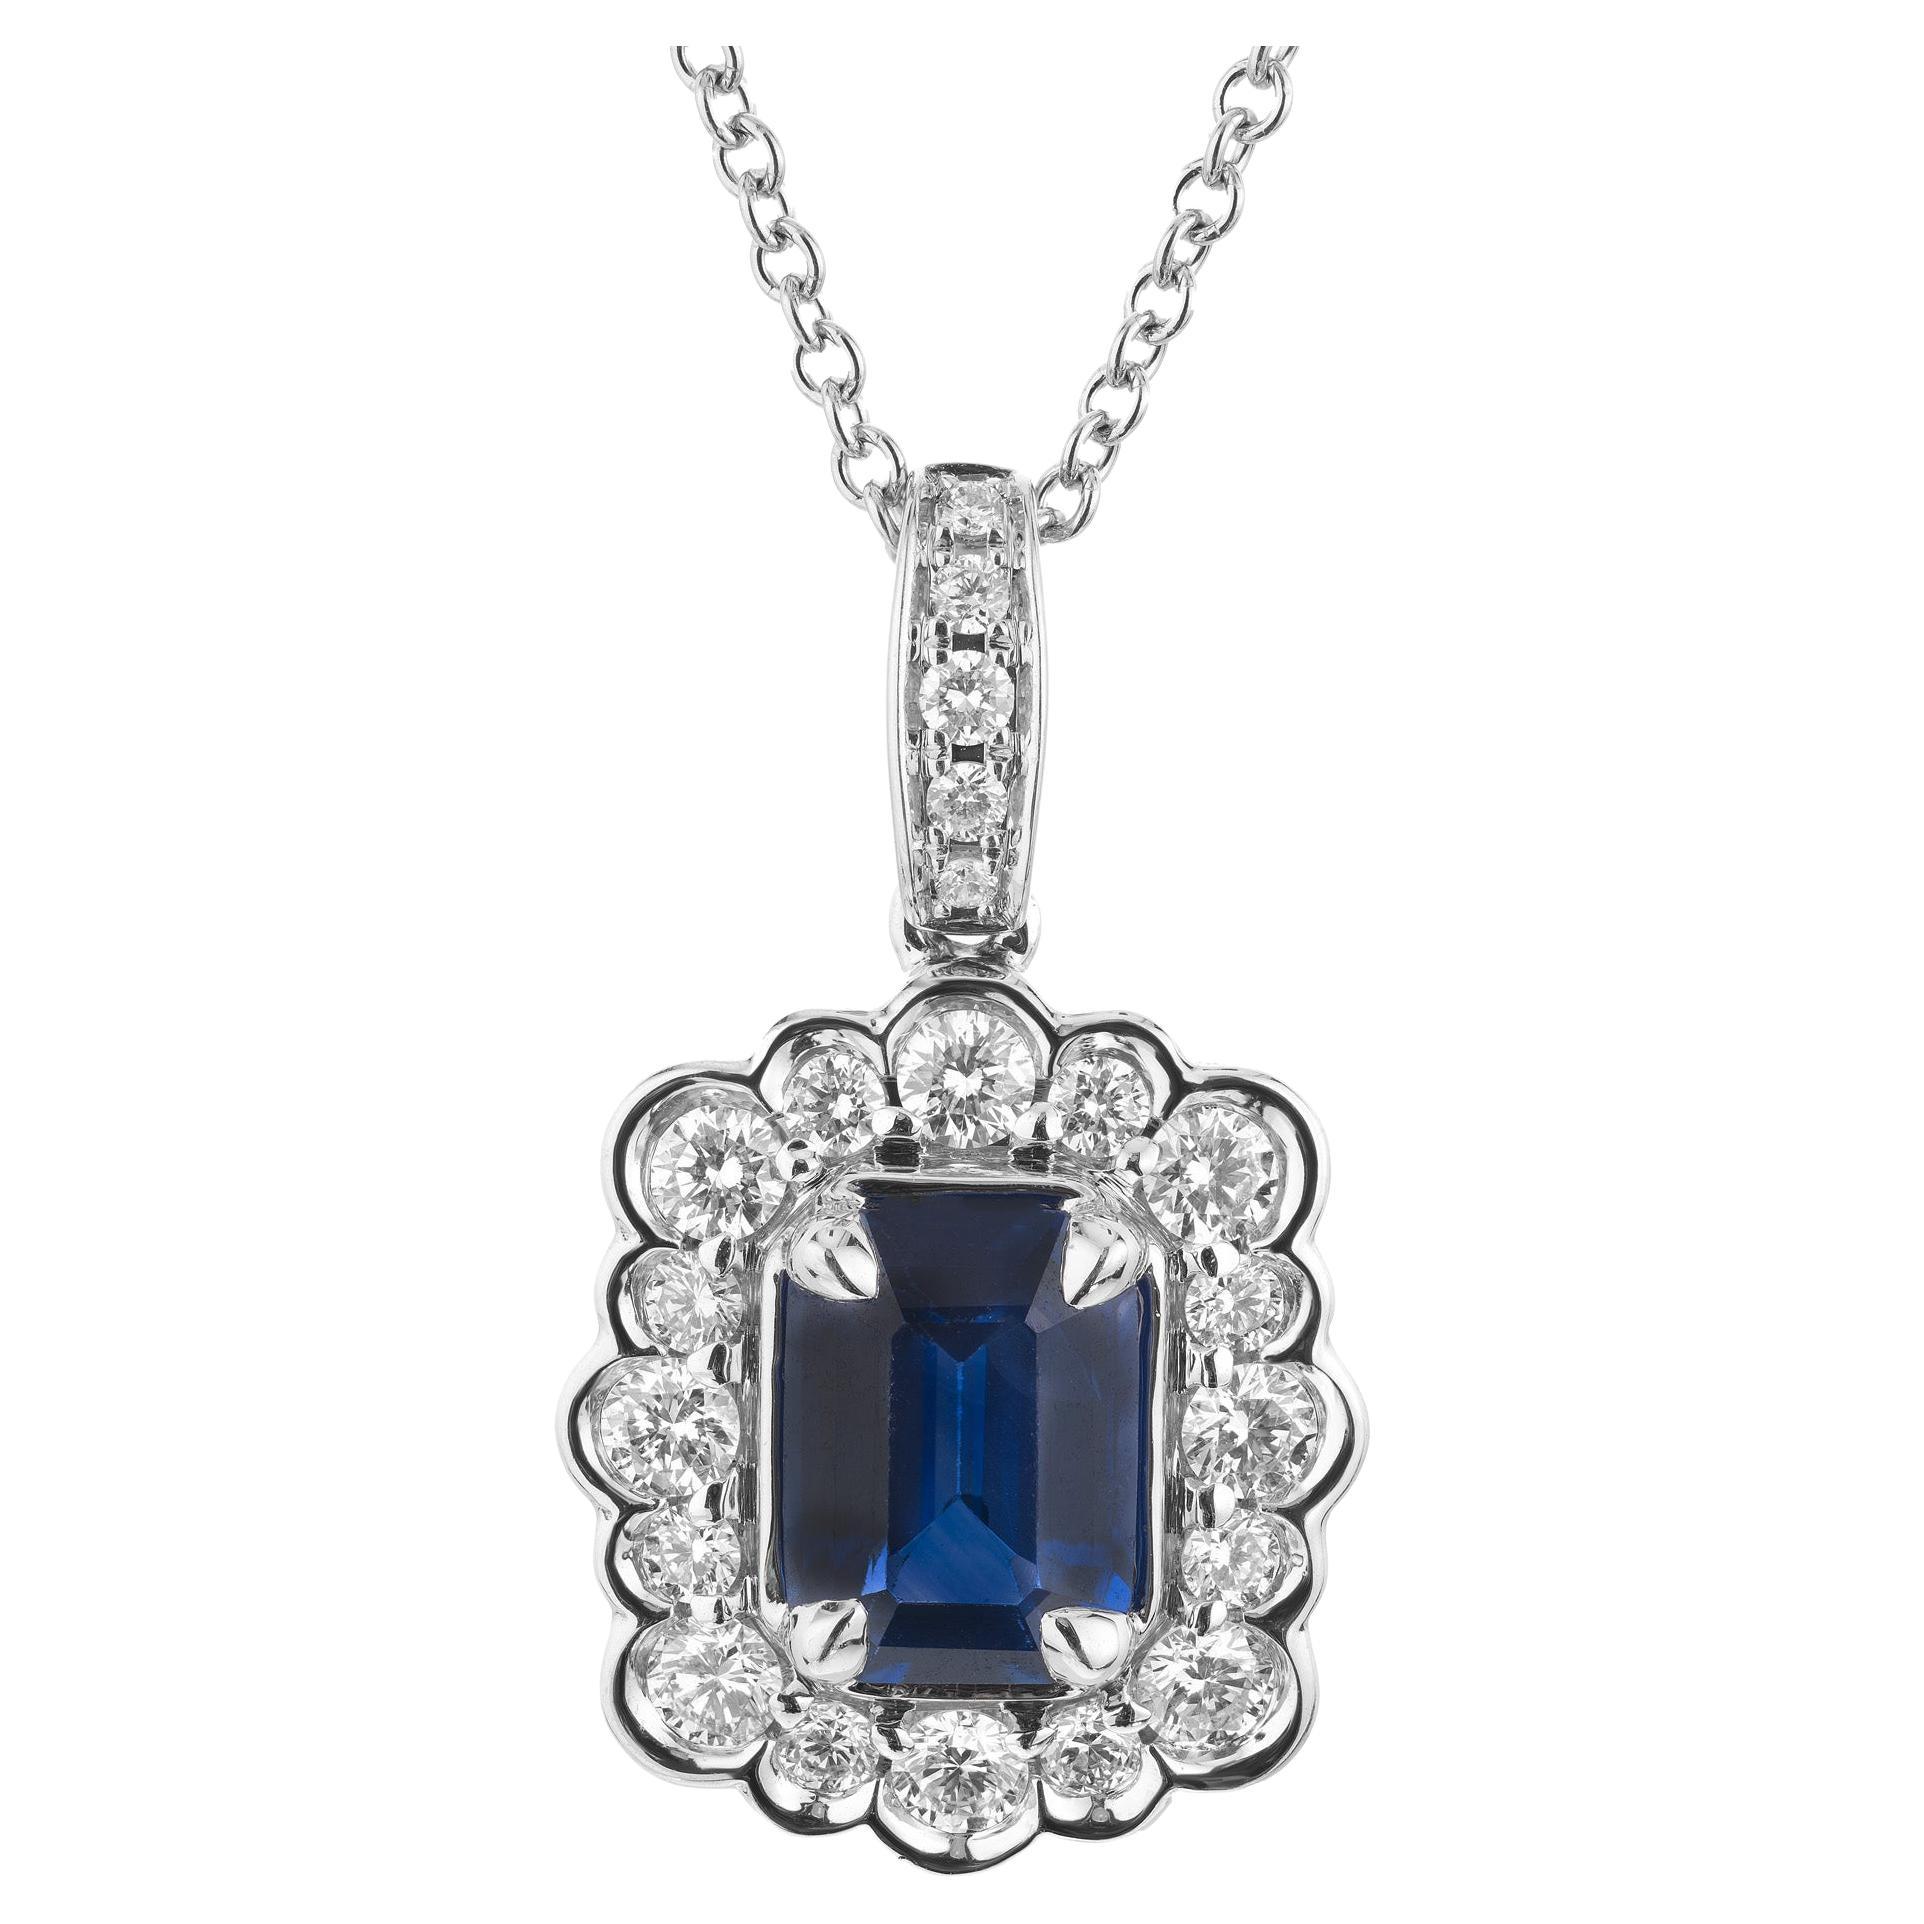 Peter Suchy GIA Certified 1.29 Carat Sapphire Diamond Halo Gold Pendant Necklace